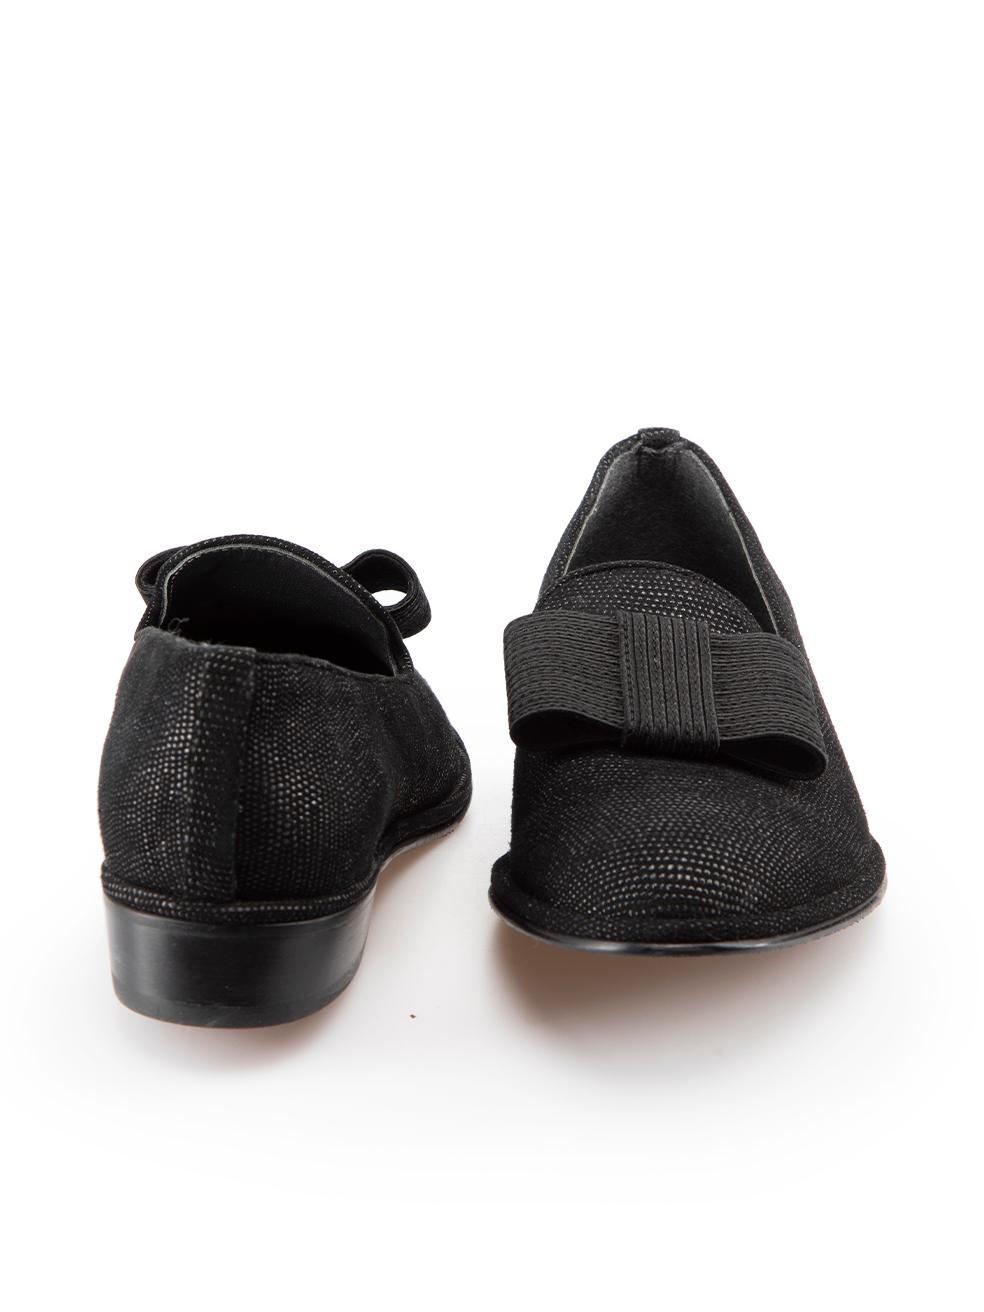 Stuart Weitzman Black Suede Bow Loafers Size US 8 In Excellent Condition For Sale In London, GB